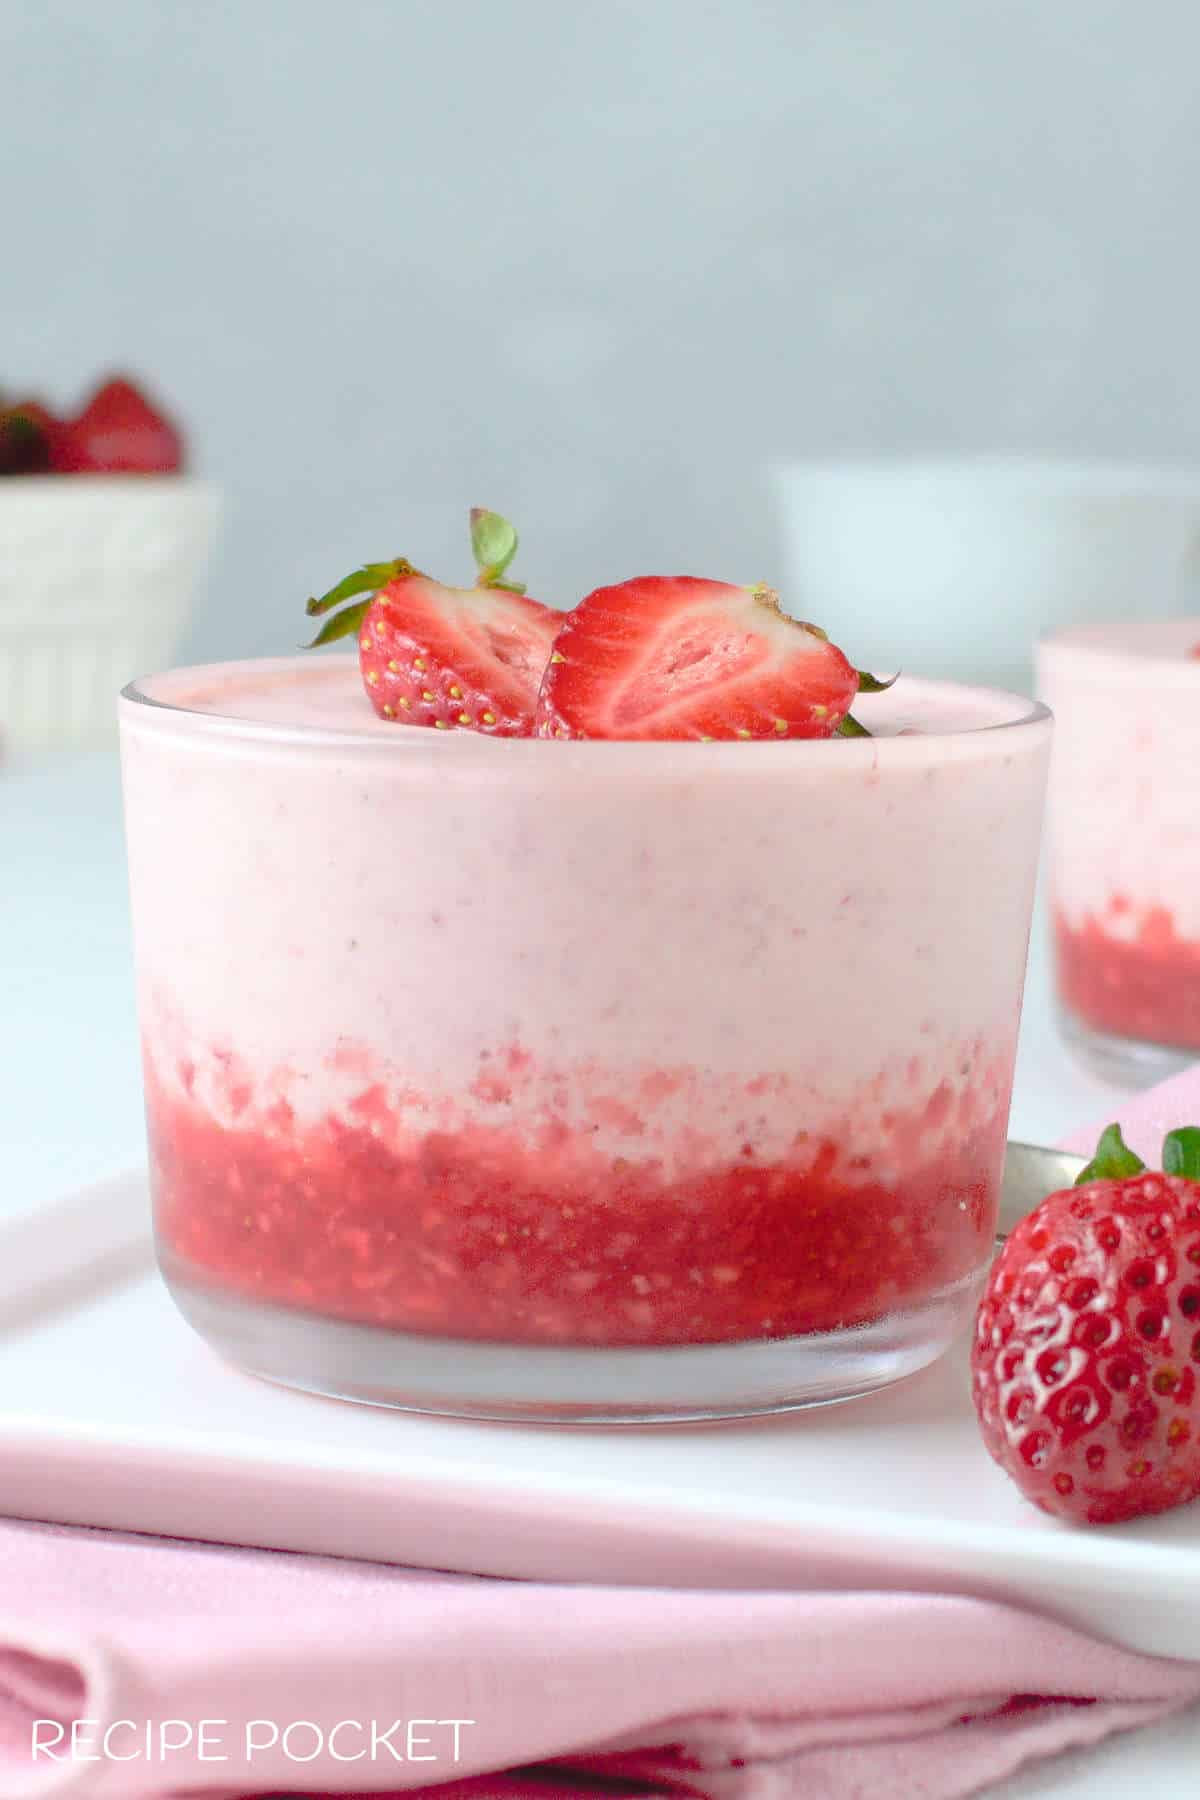 Strawberry fool in a glass with sliced strawberries on top.